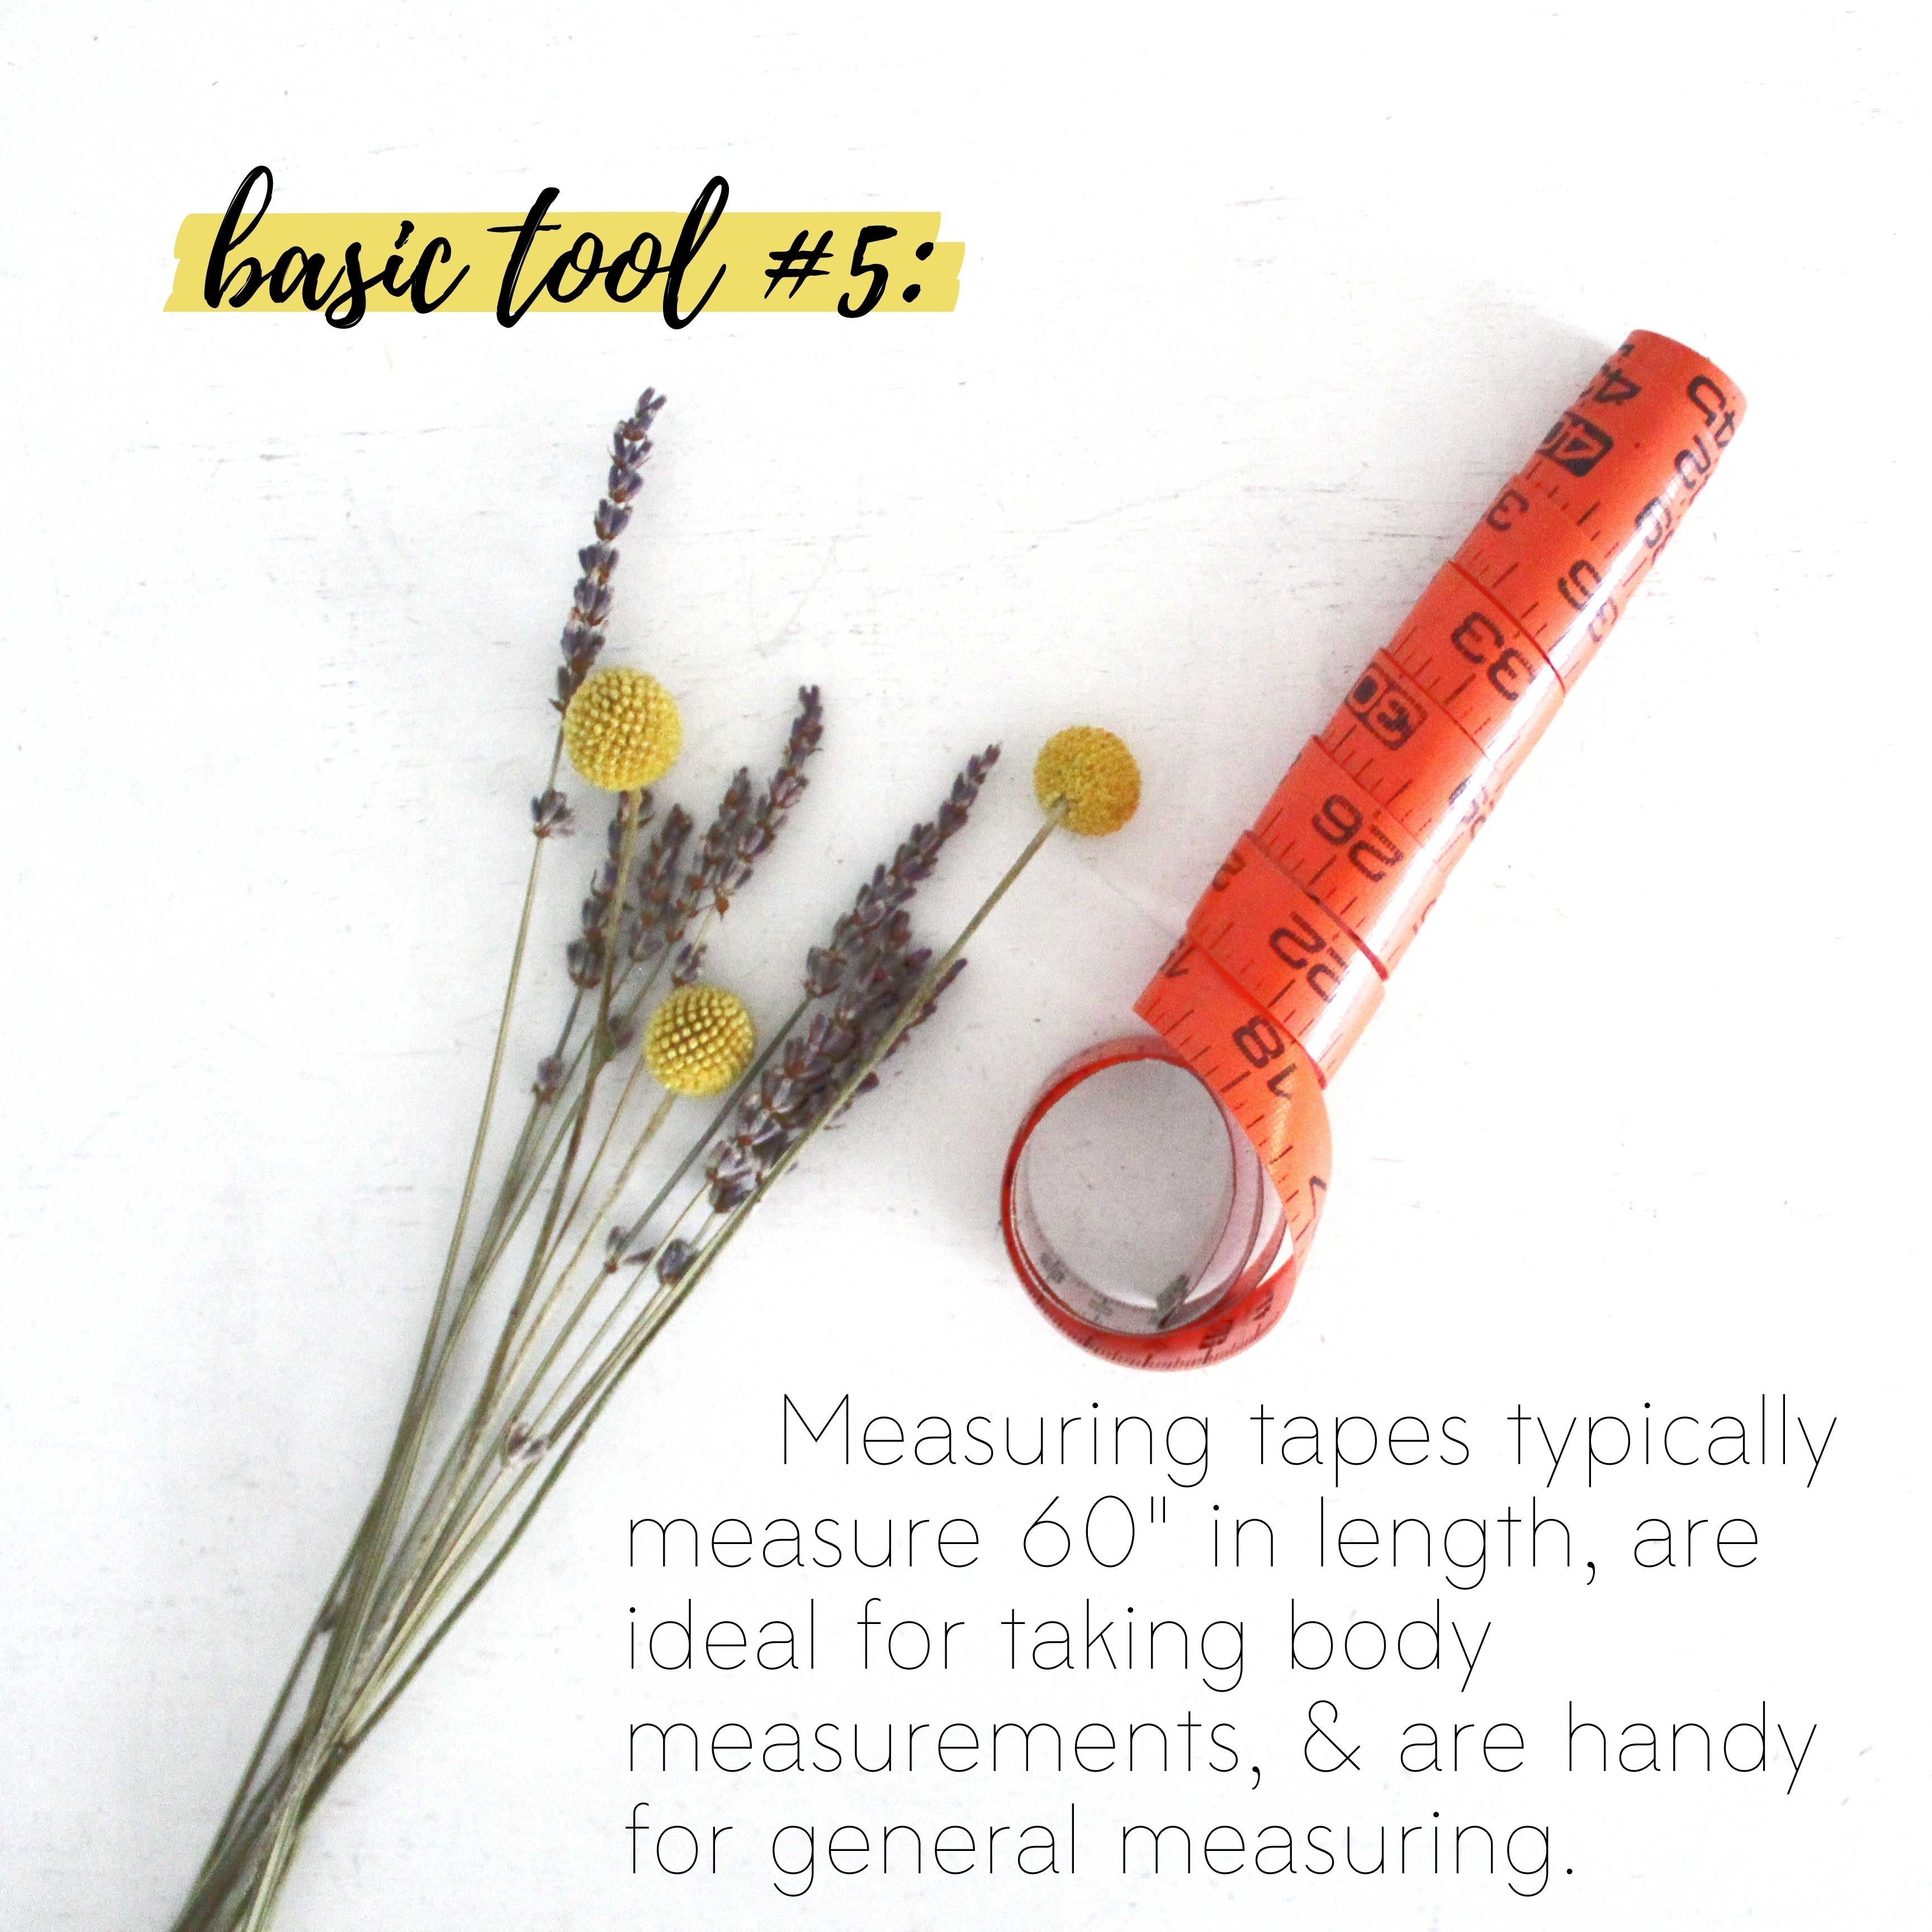 How To Build A Sewing Kit: Basic Tool #5, Measuring Tape